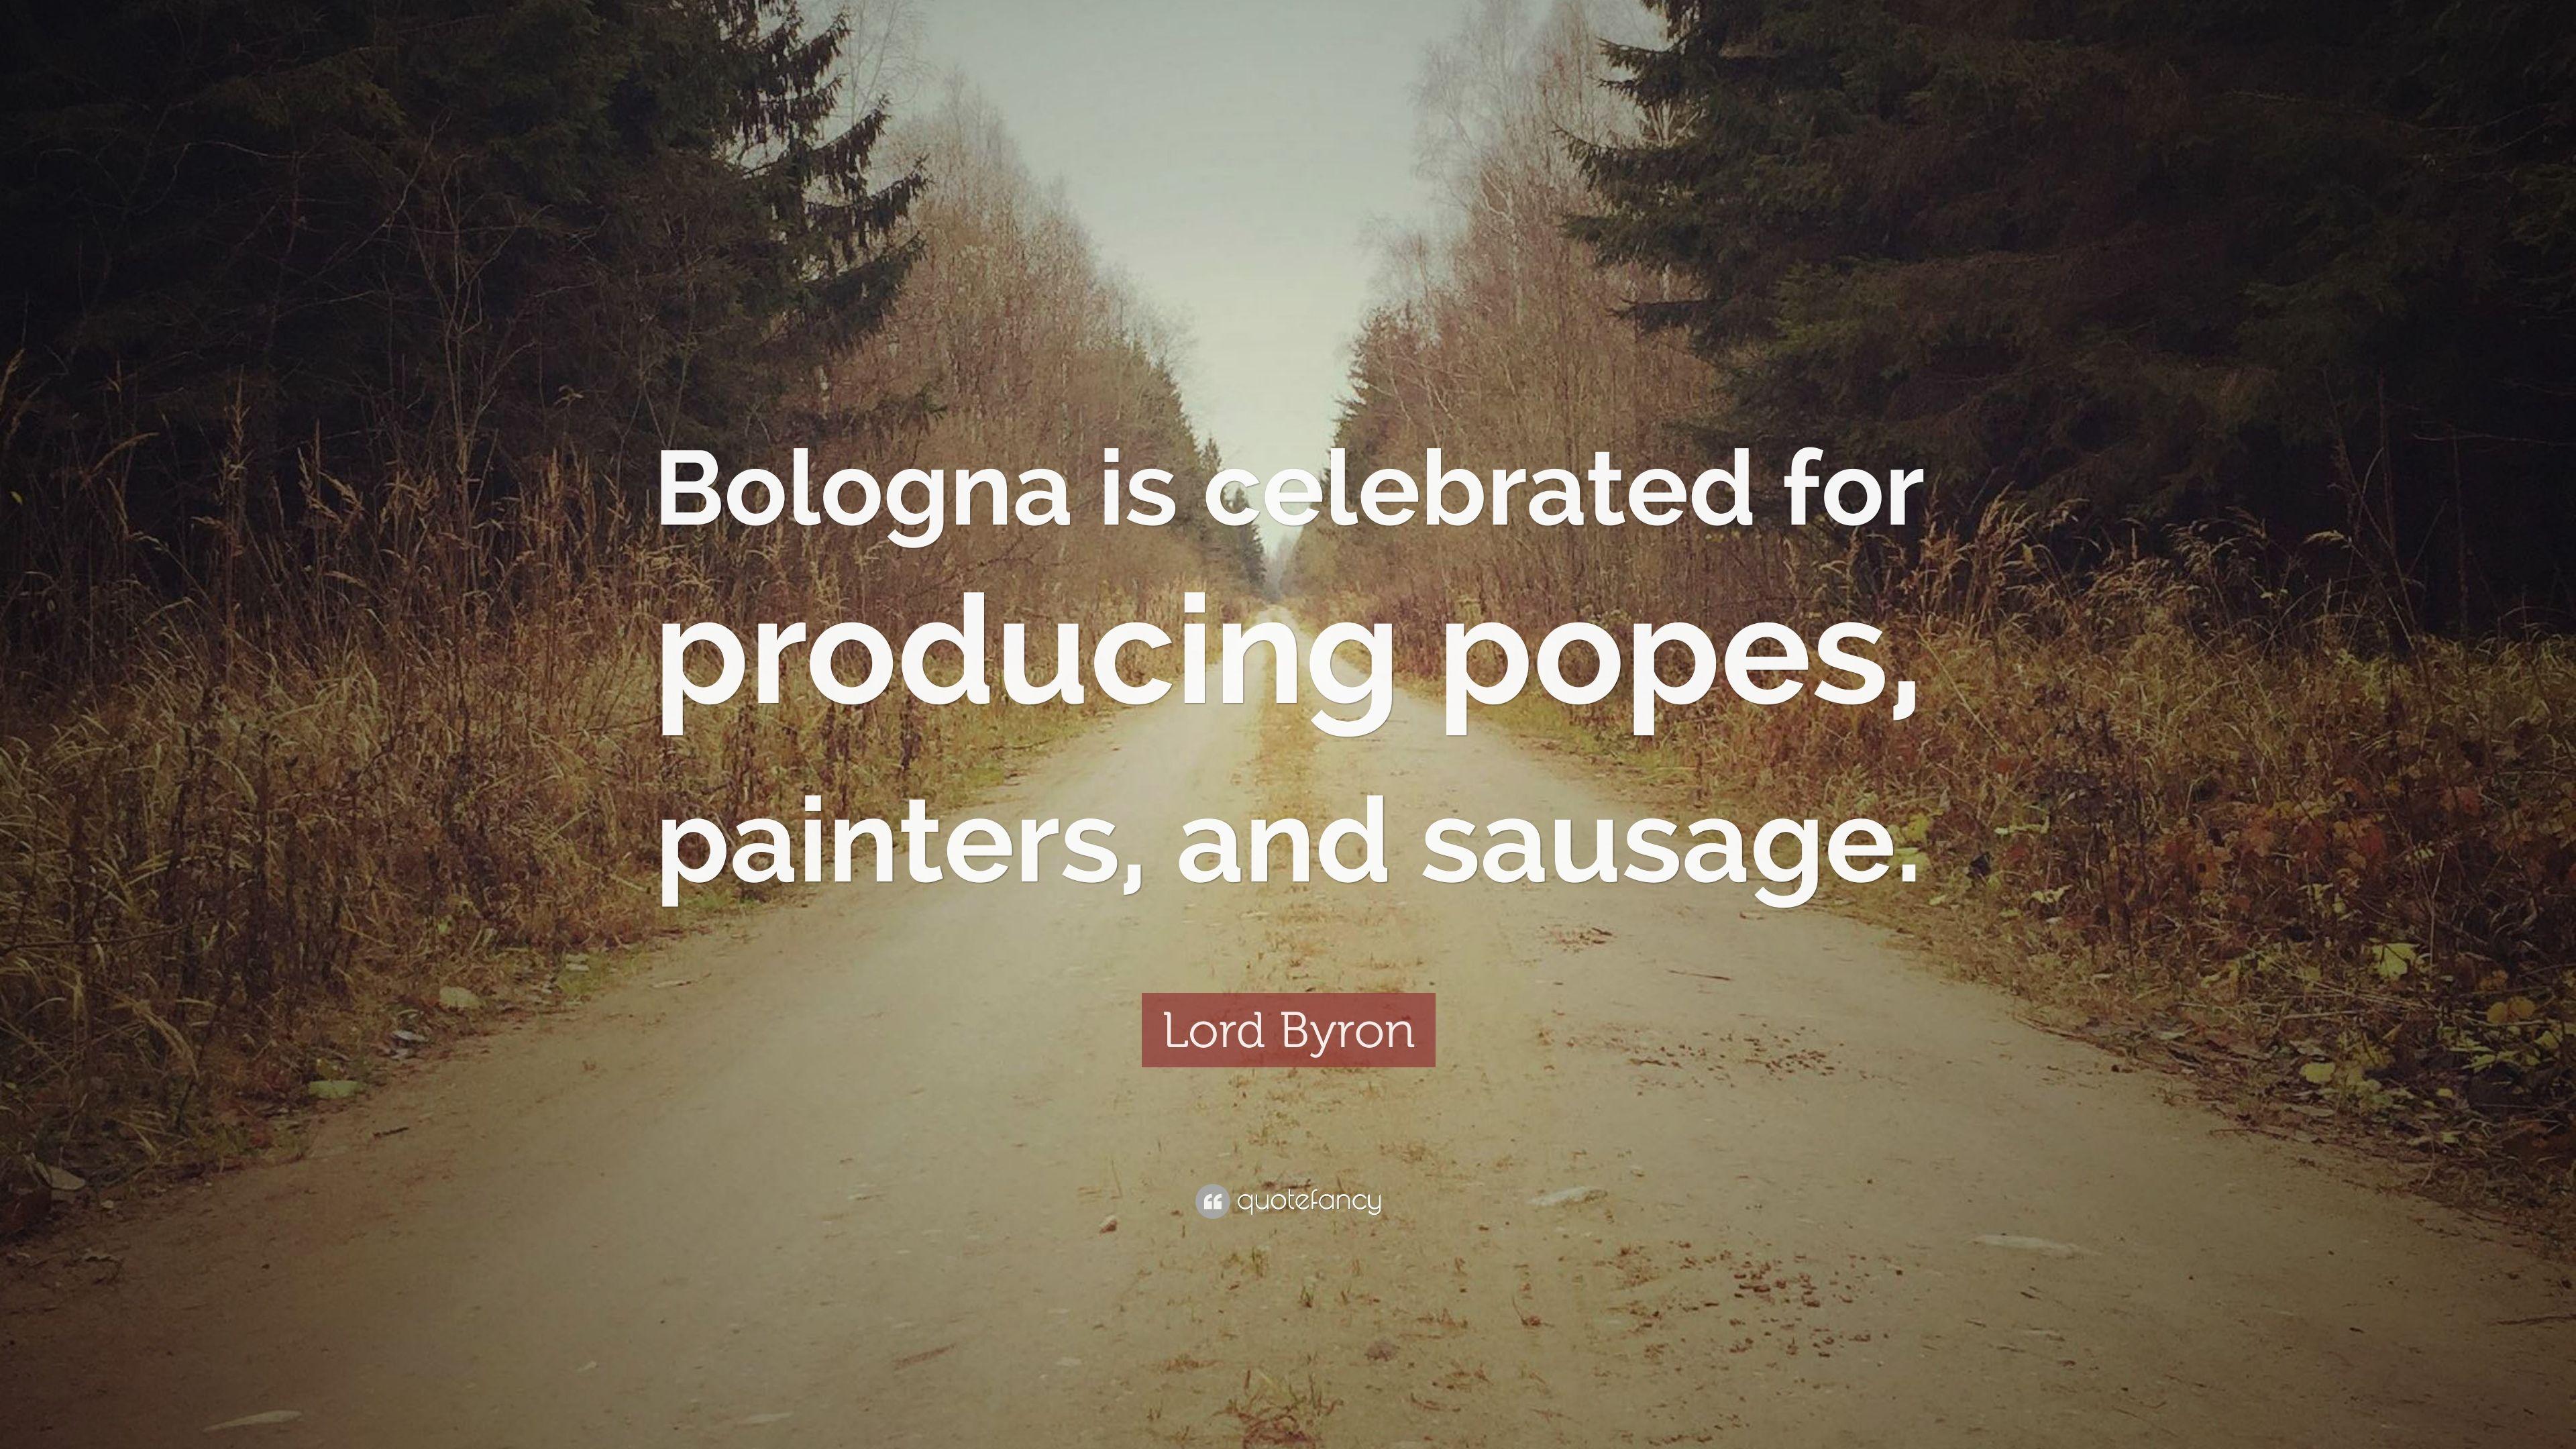 Lord Byron Quote: “Bologna is celebrated for producing popes